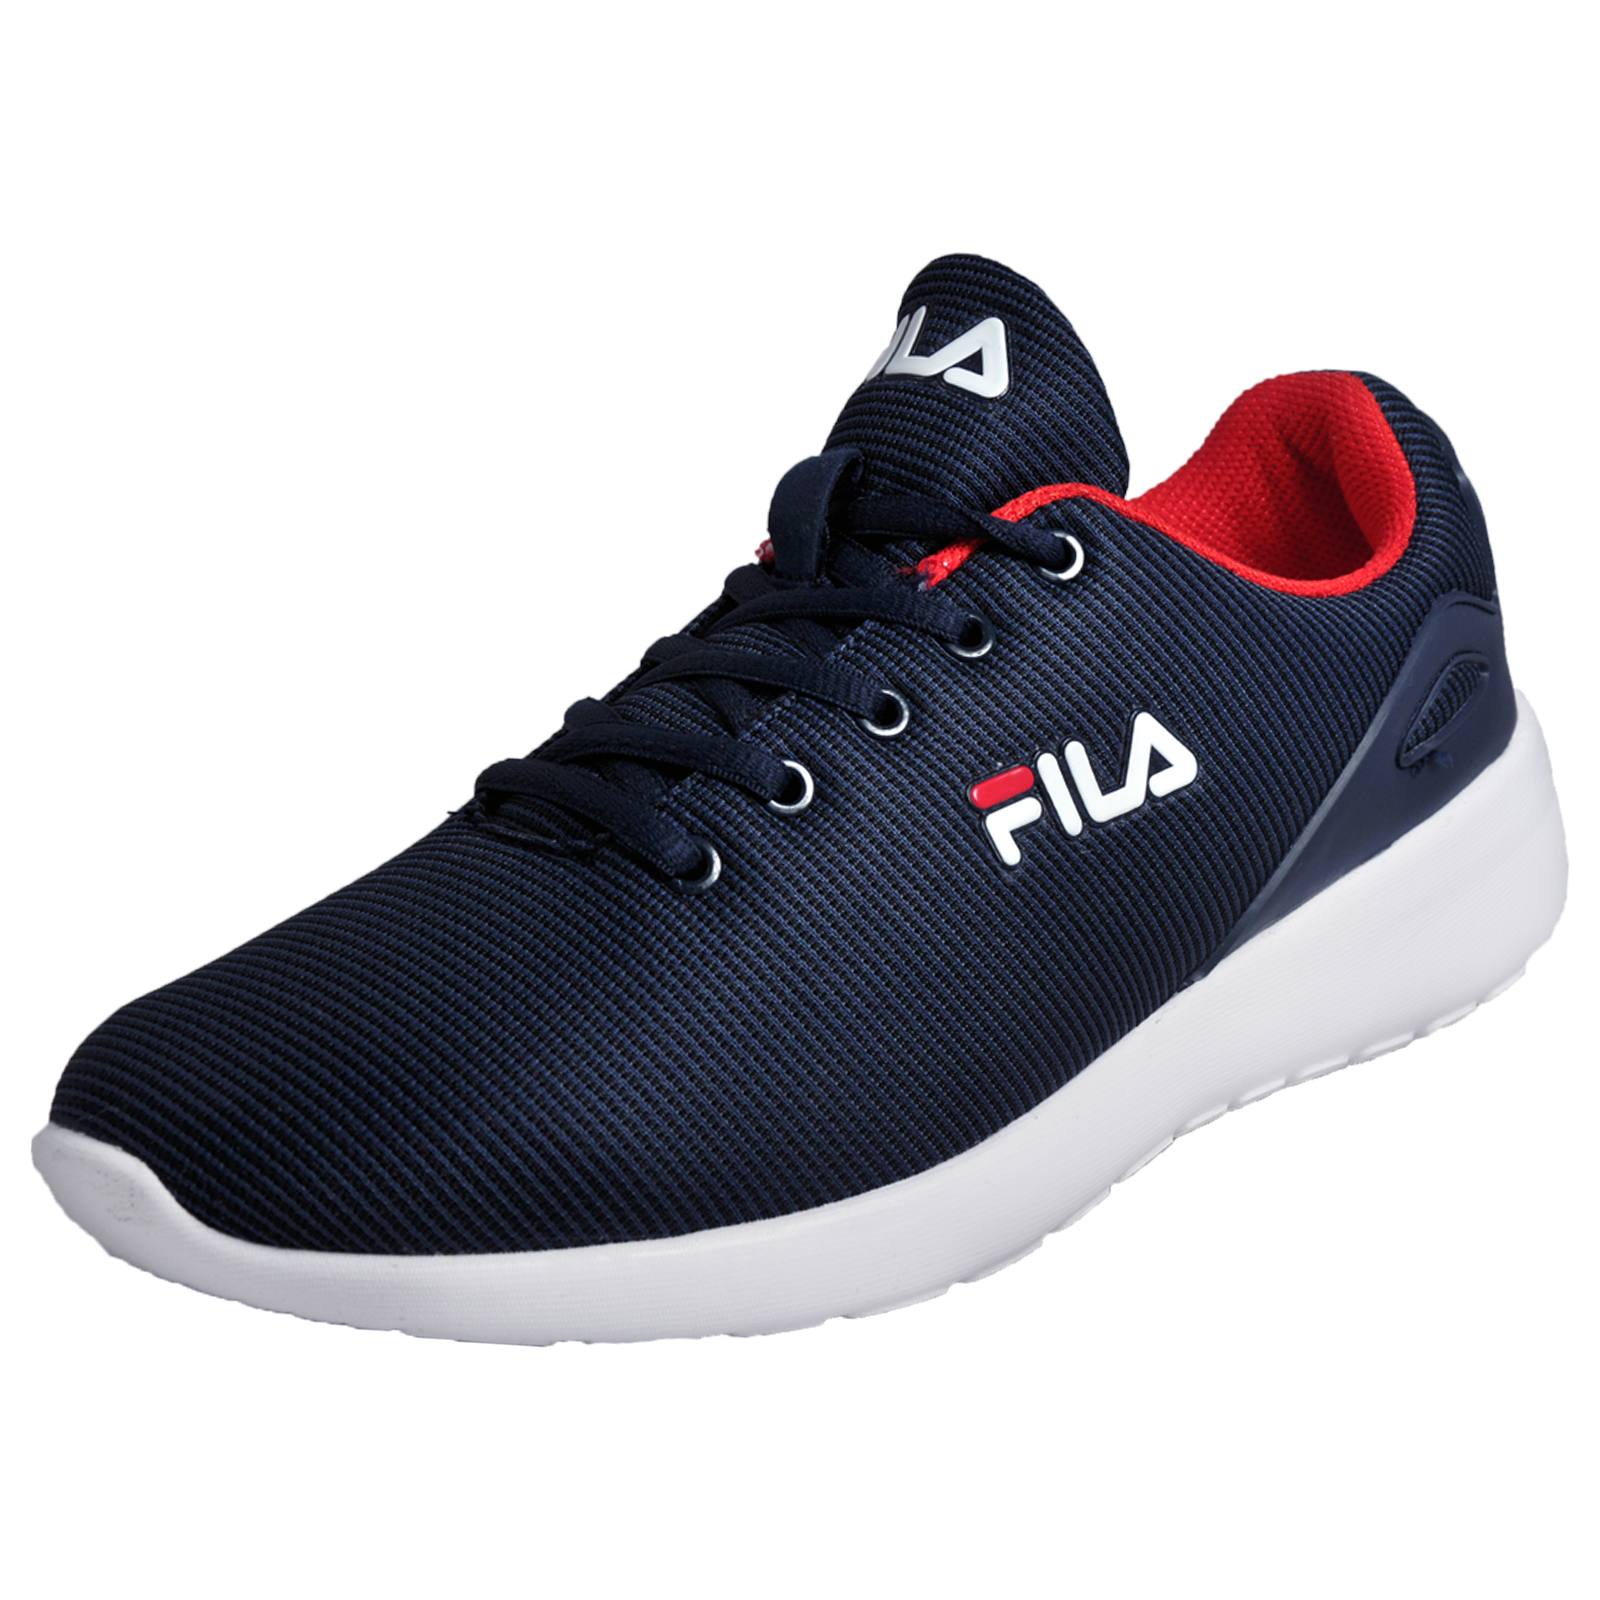 Fila Fury Run Low Mens Running Shoes Fitness Gym Trainers Navy